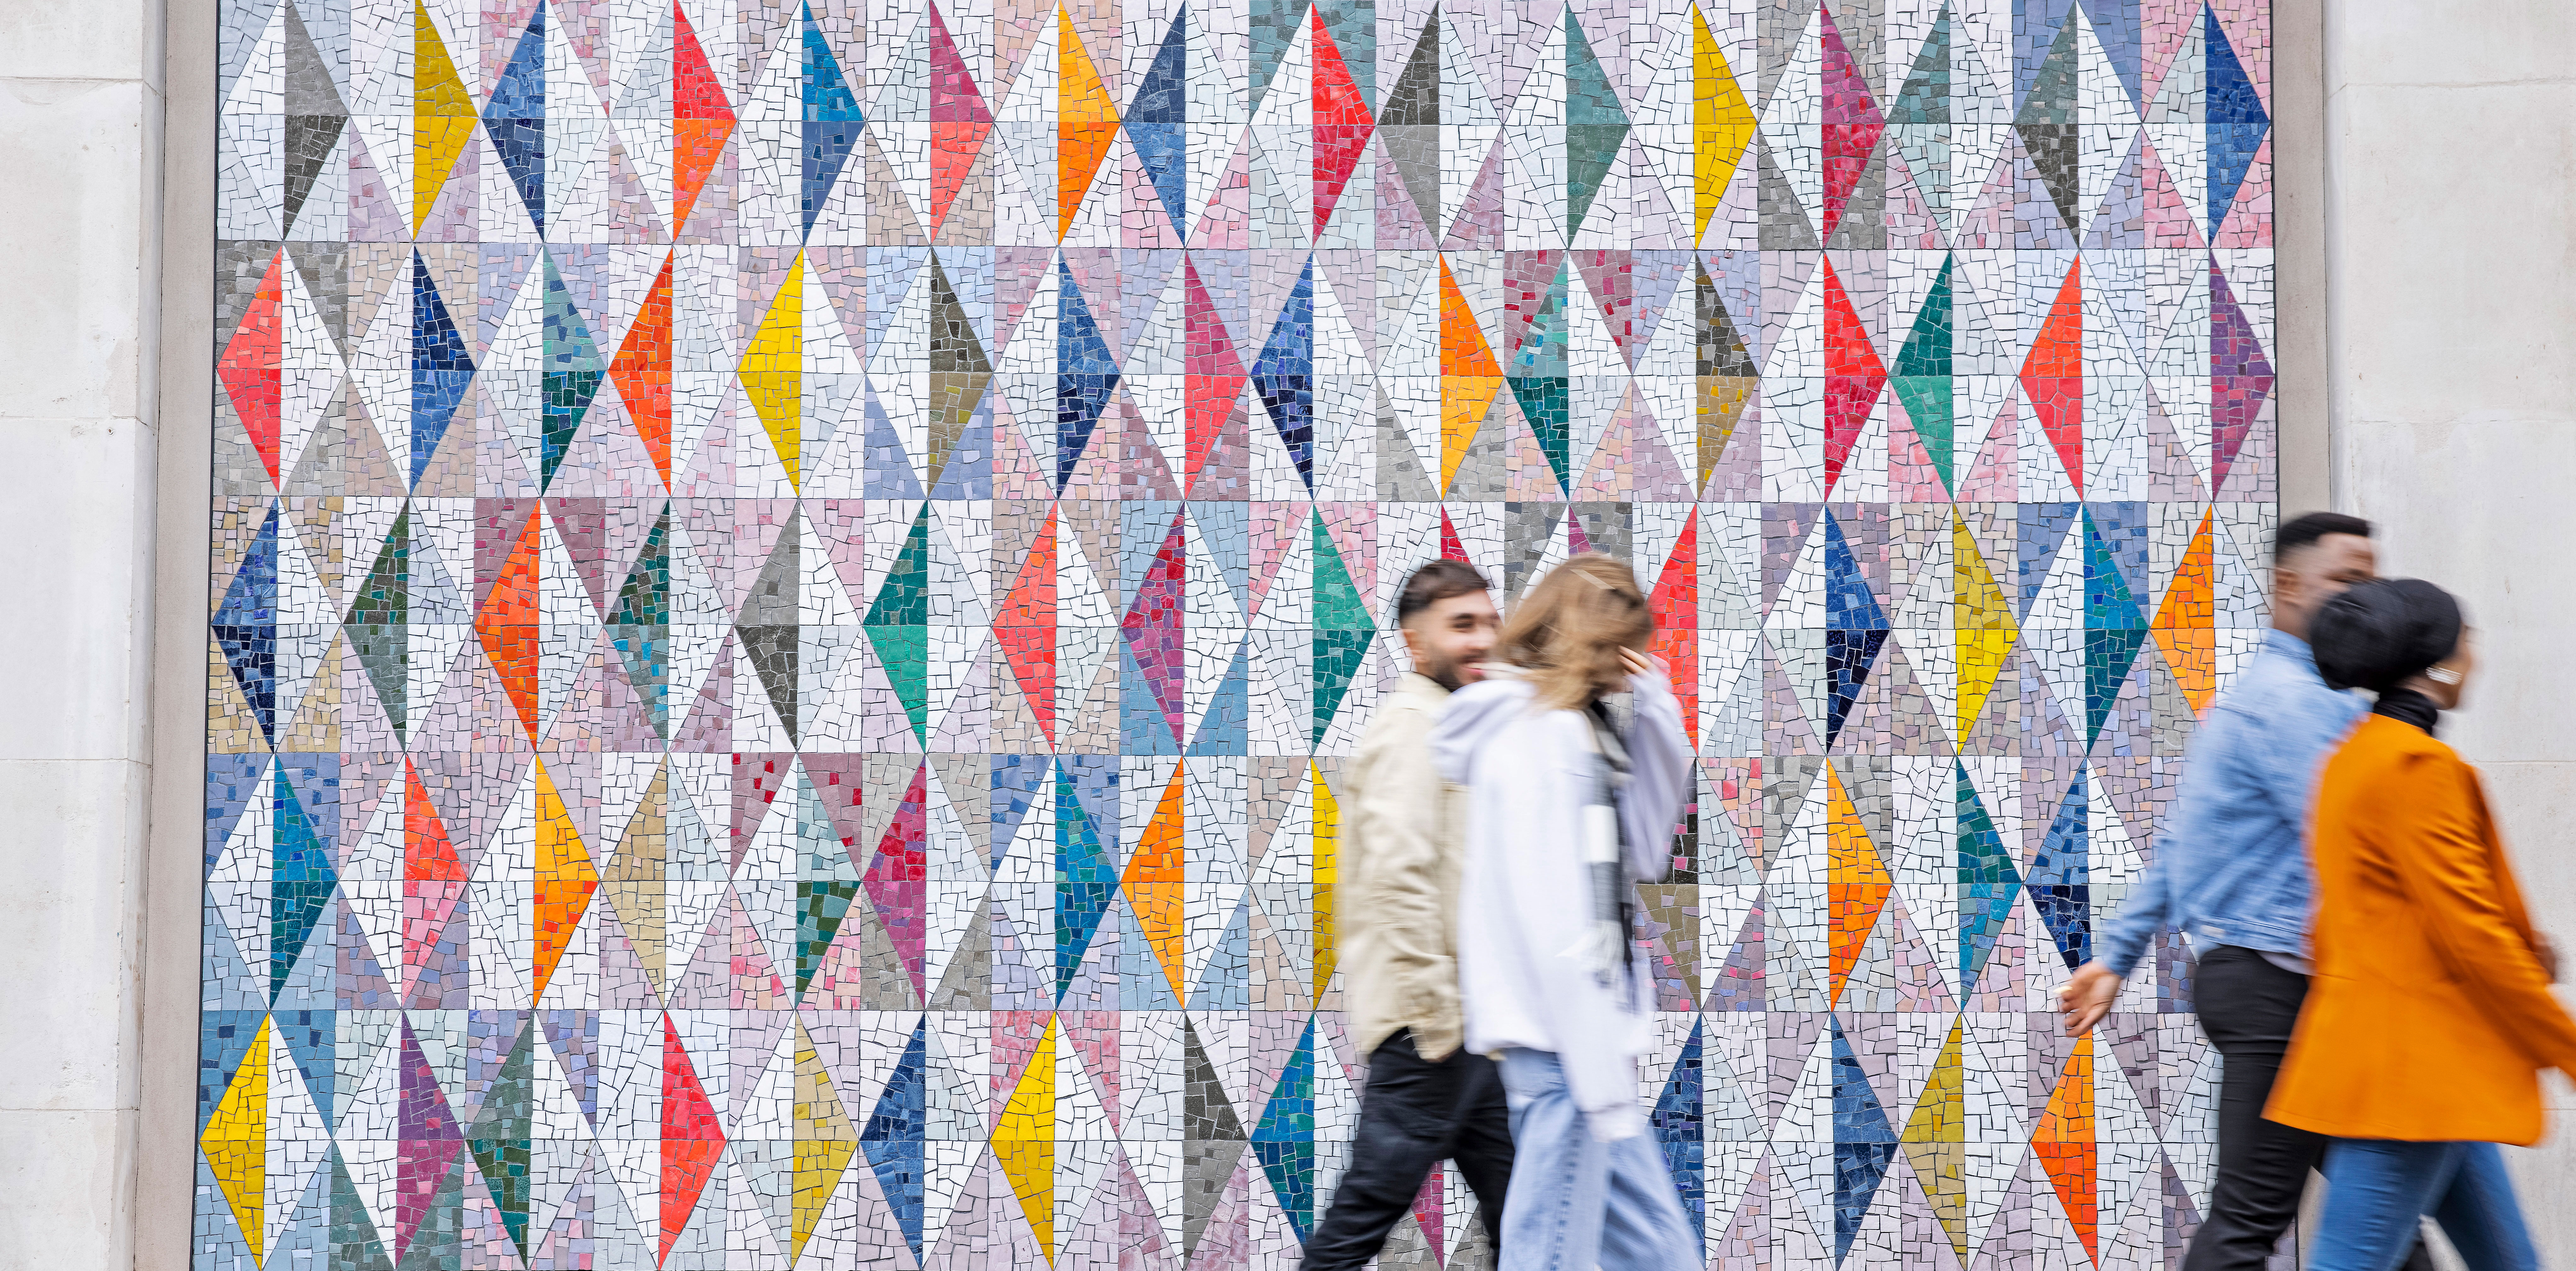 Students passing by a colourful wall display